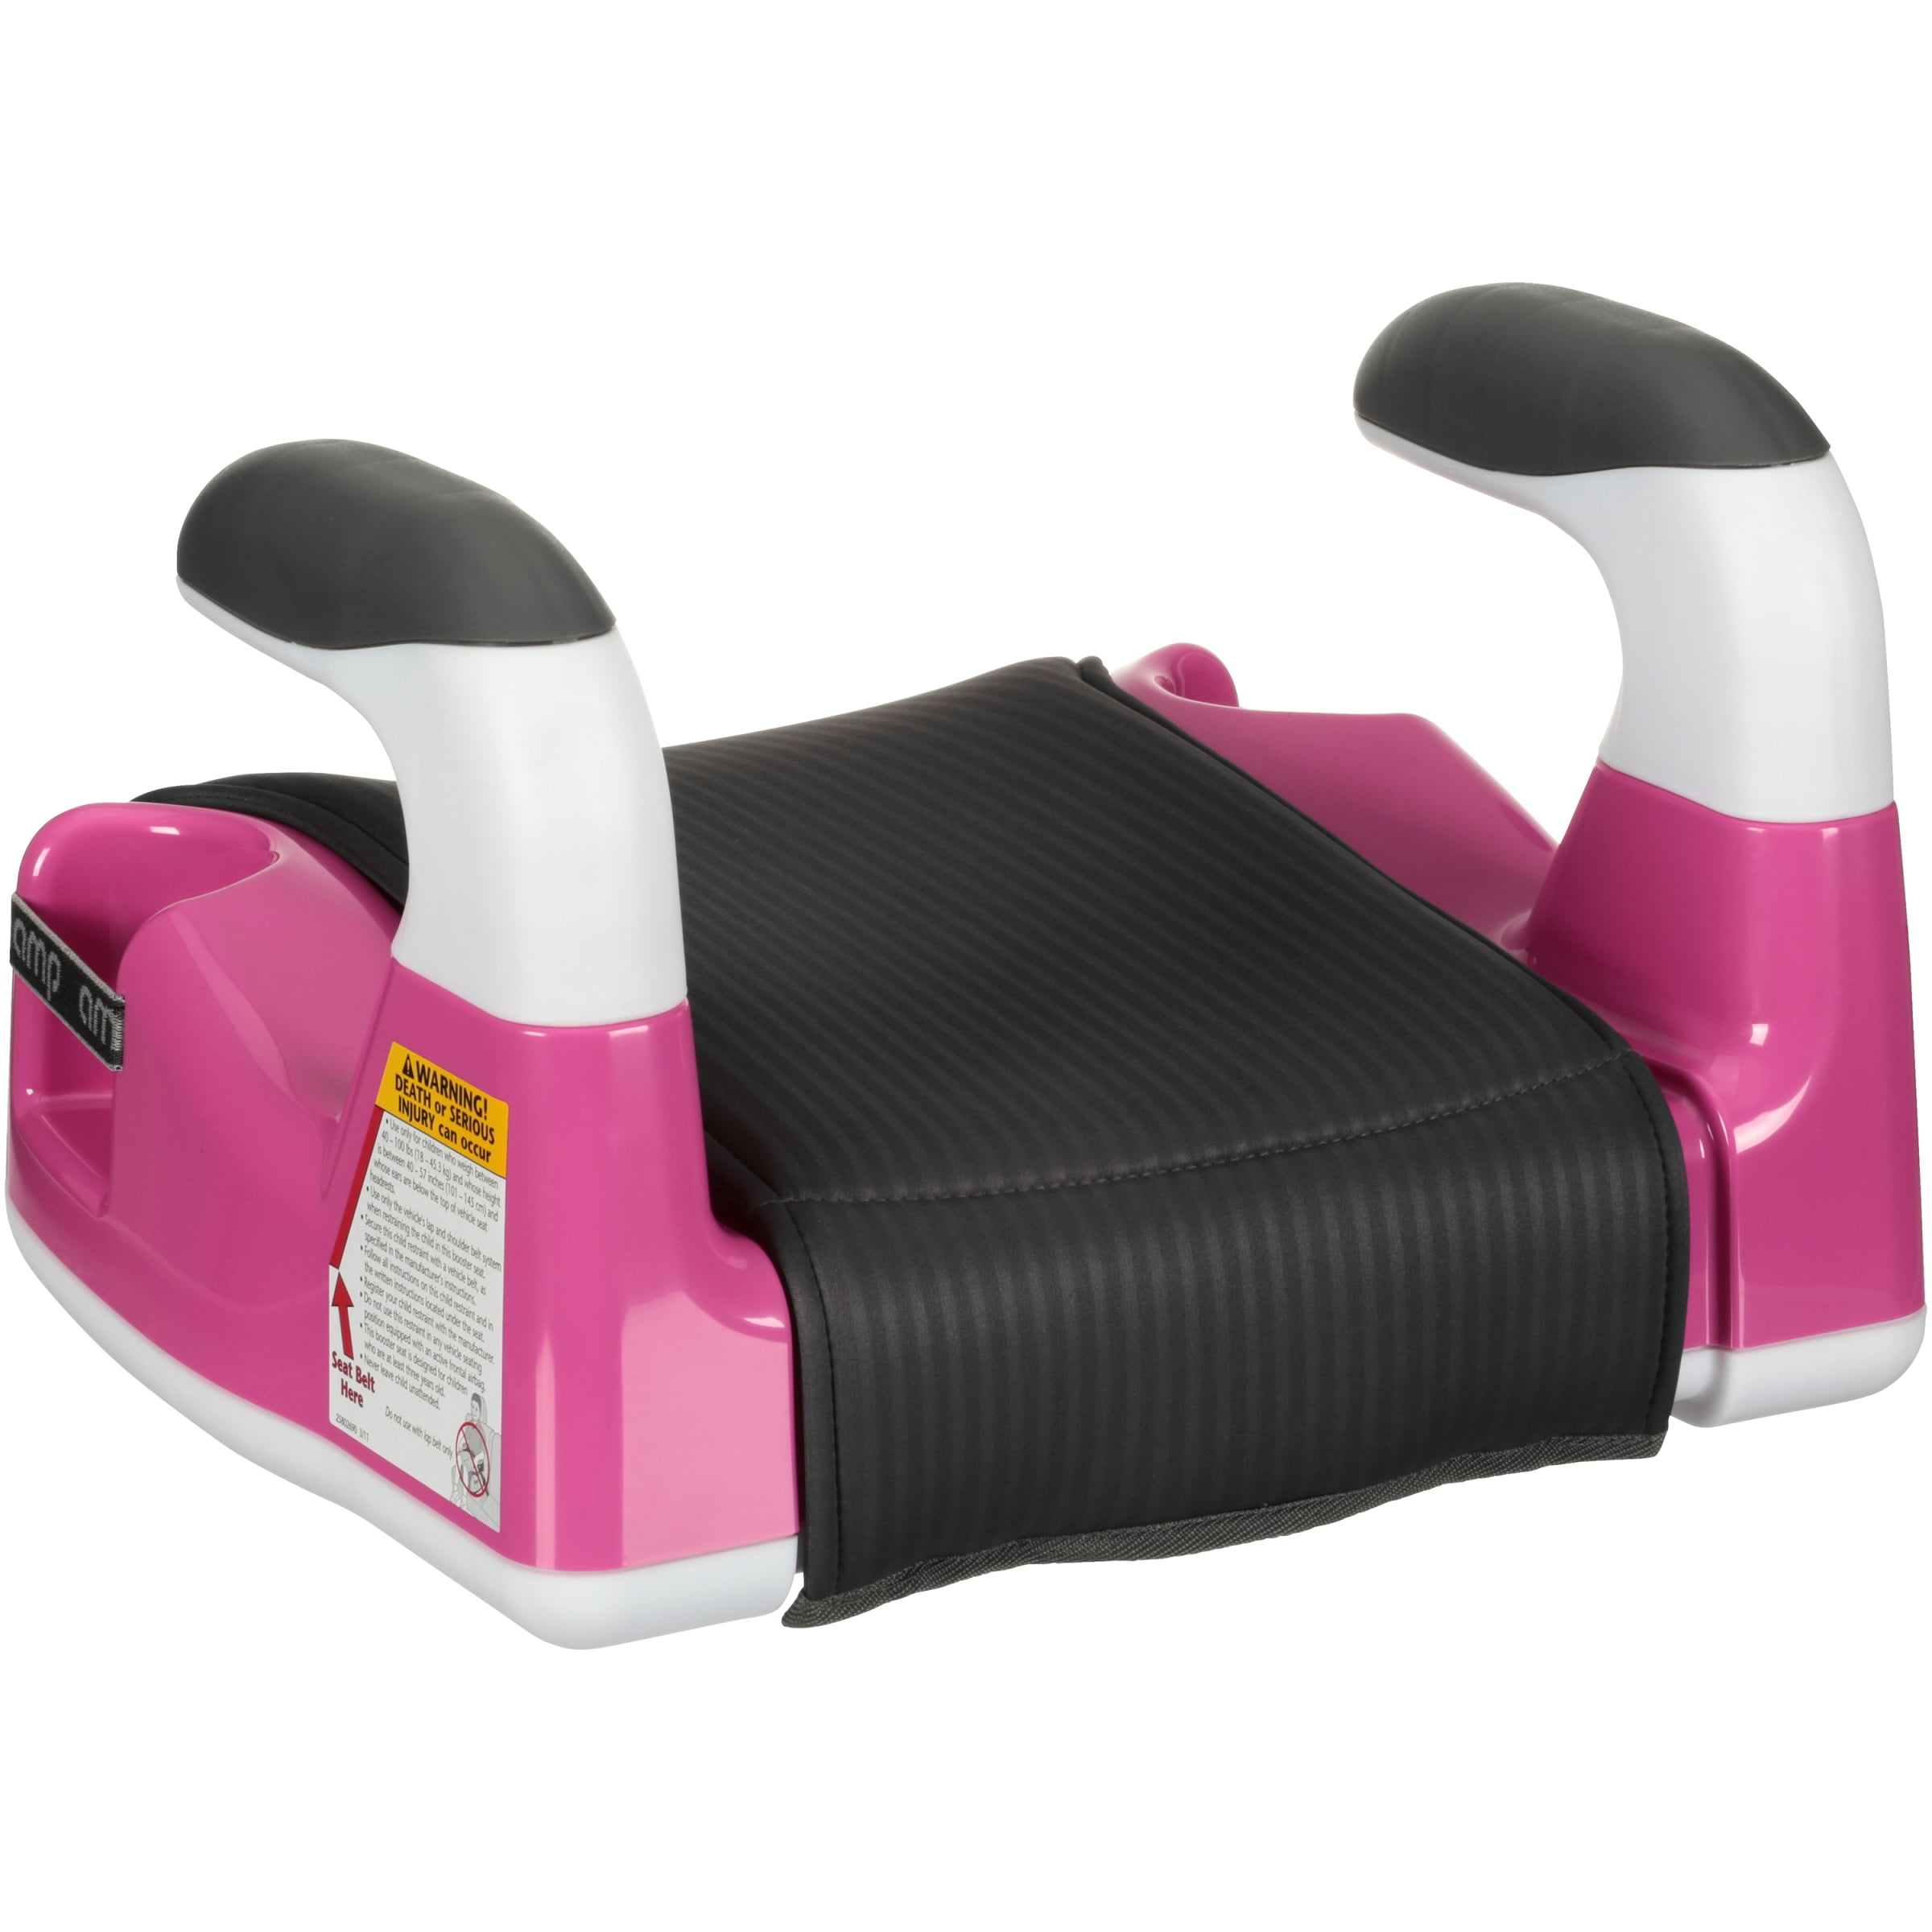 evenflo amp select car booster seat